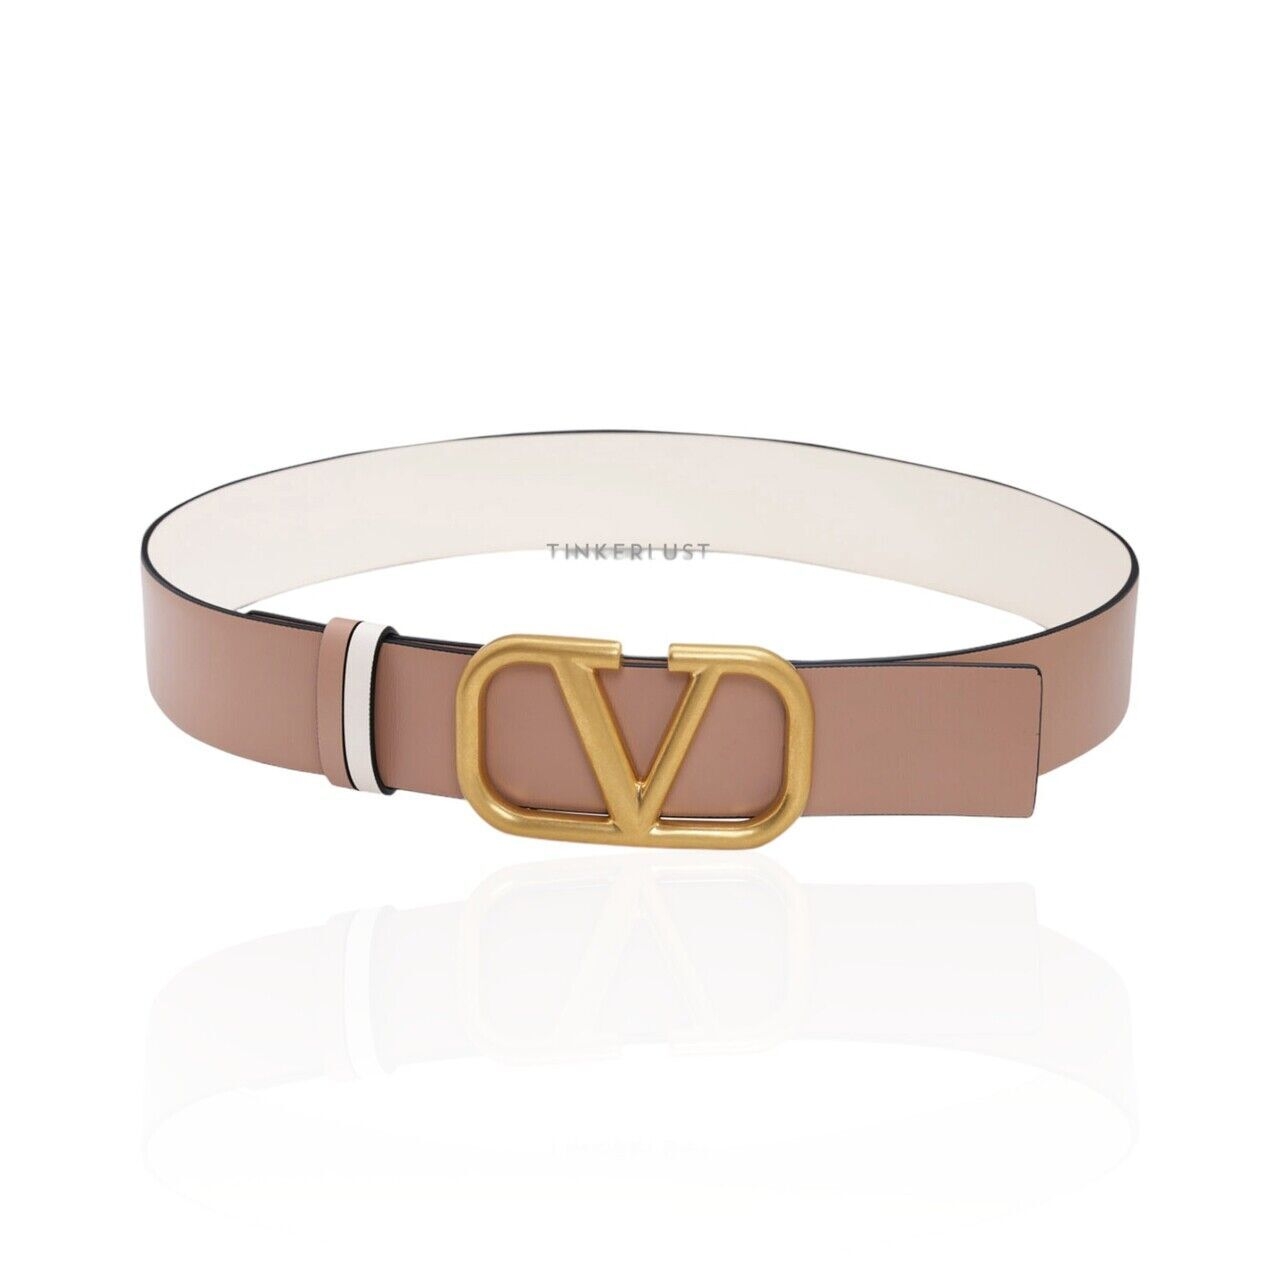 Valentino Reversible in Light Ivory/Rose Cannelle Leather with VLogo Buckle Belt